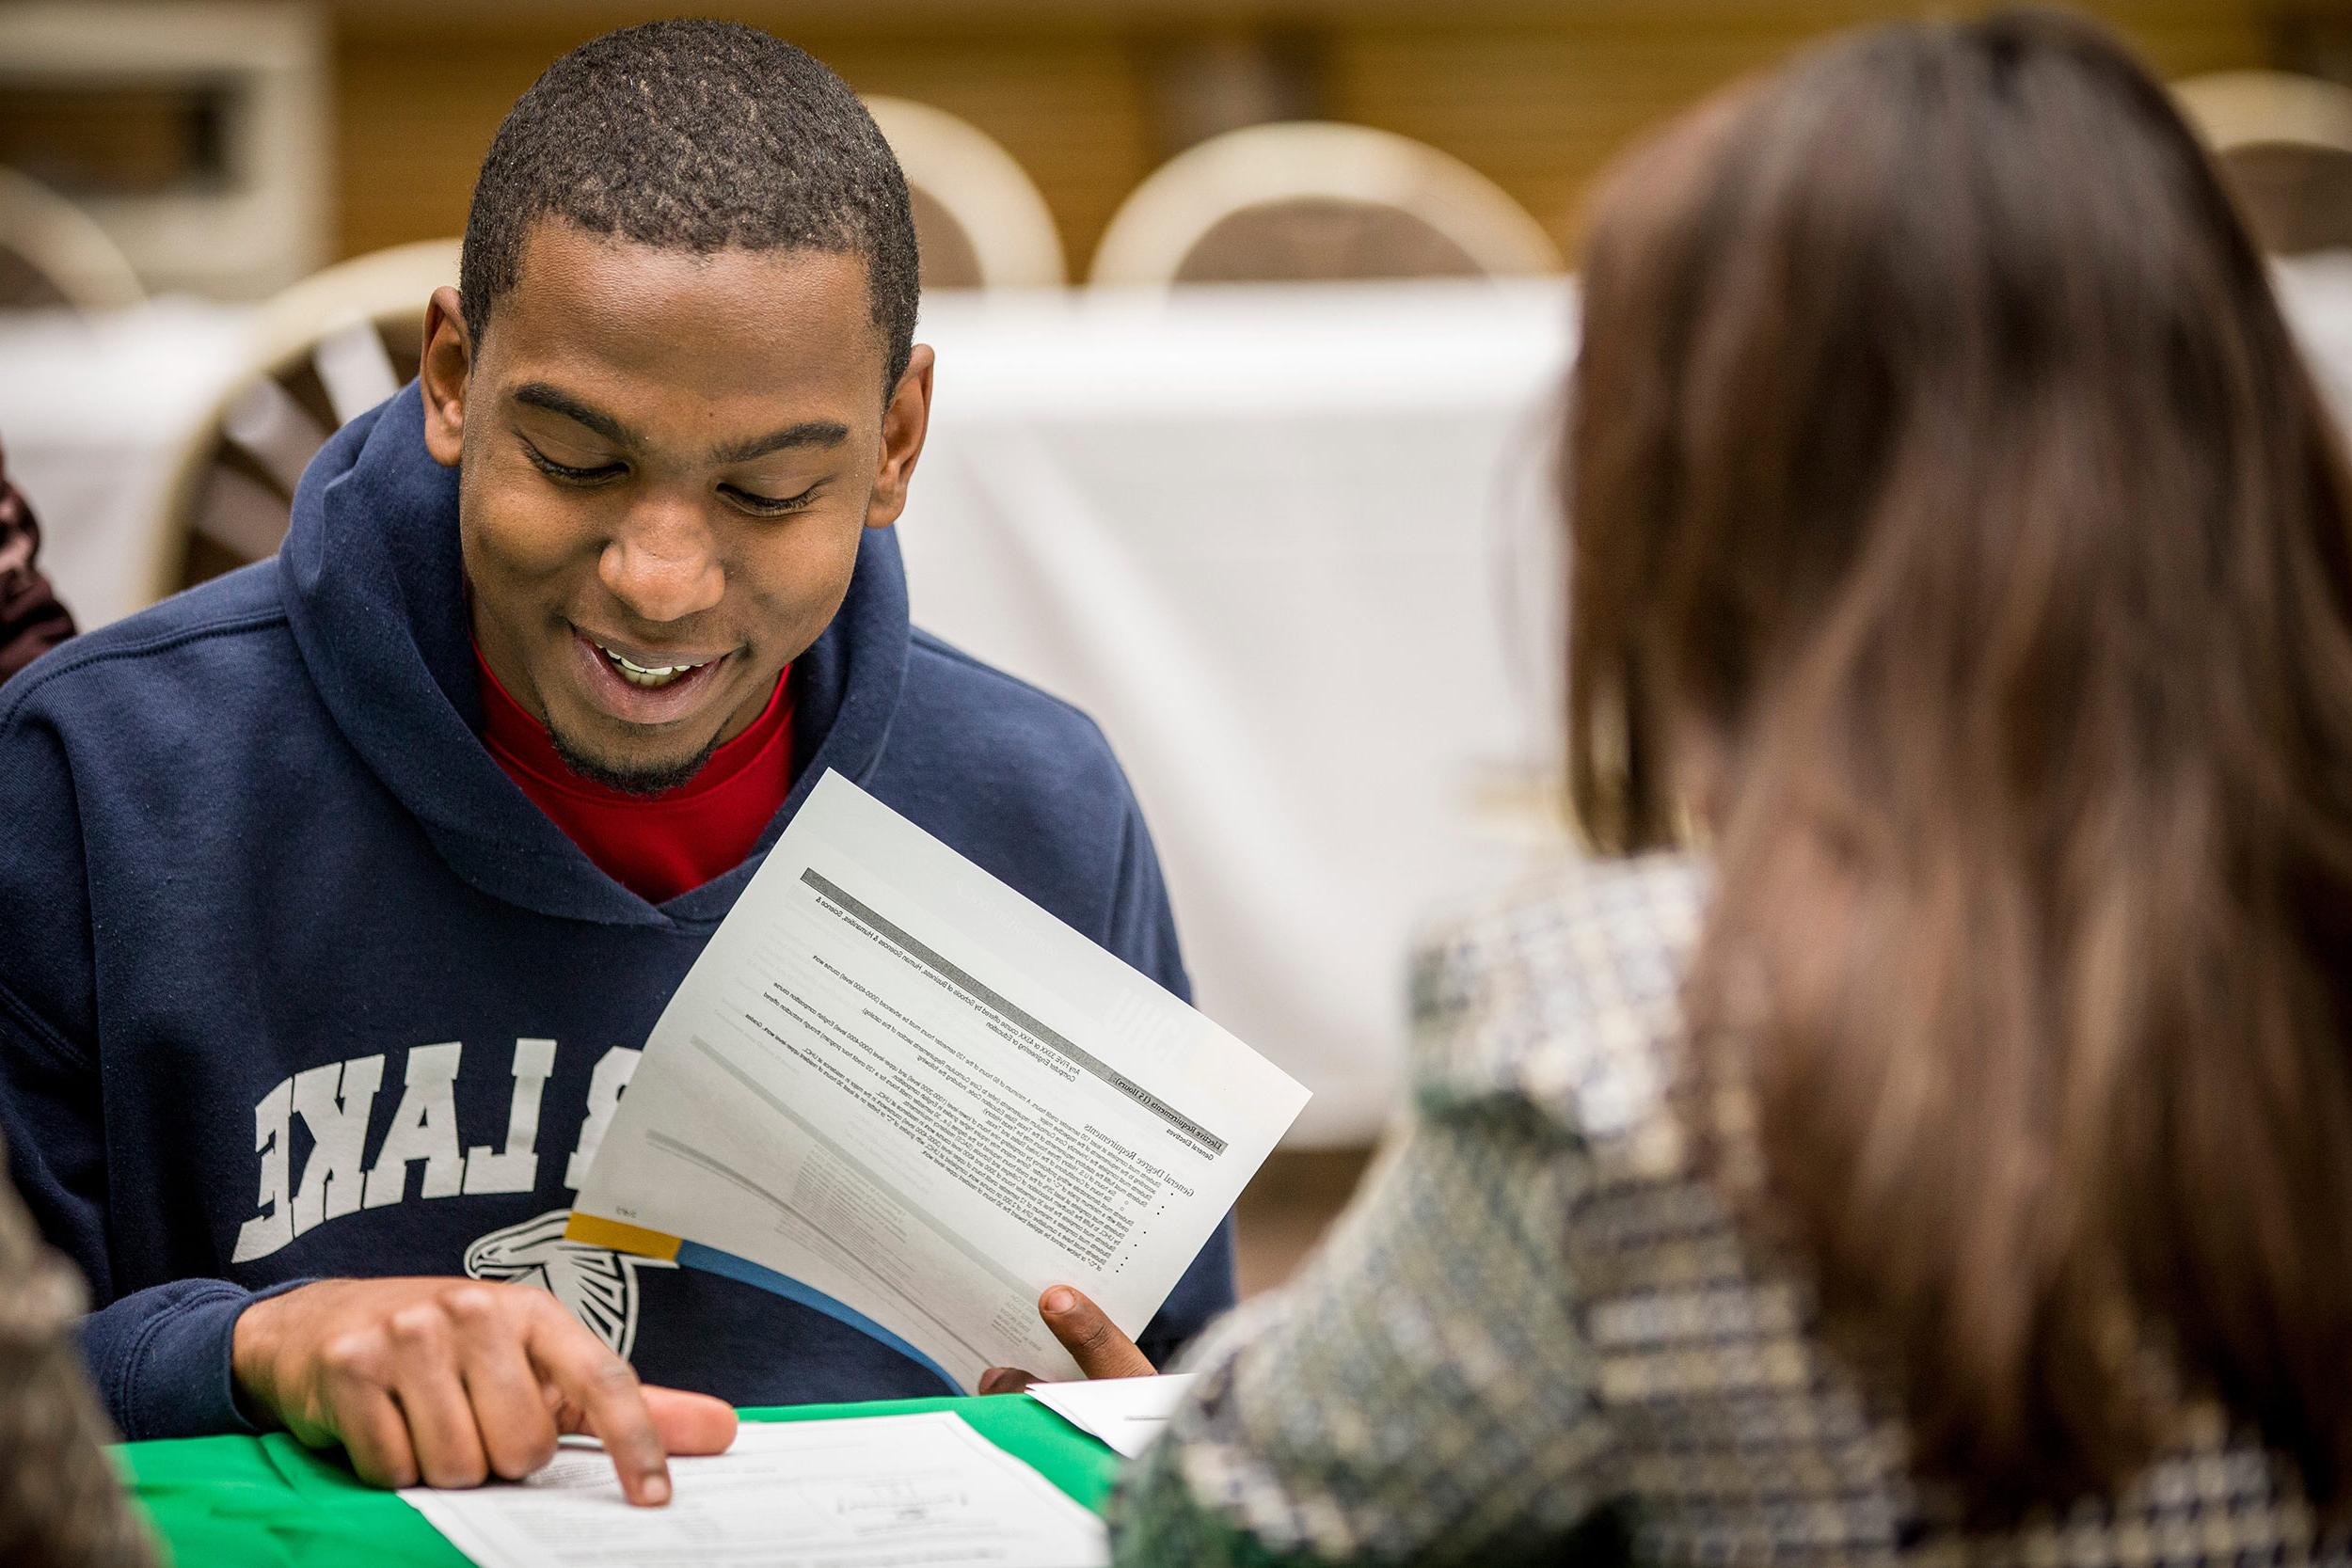 Student smiling and reading through papers